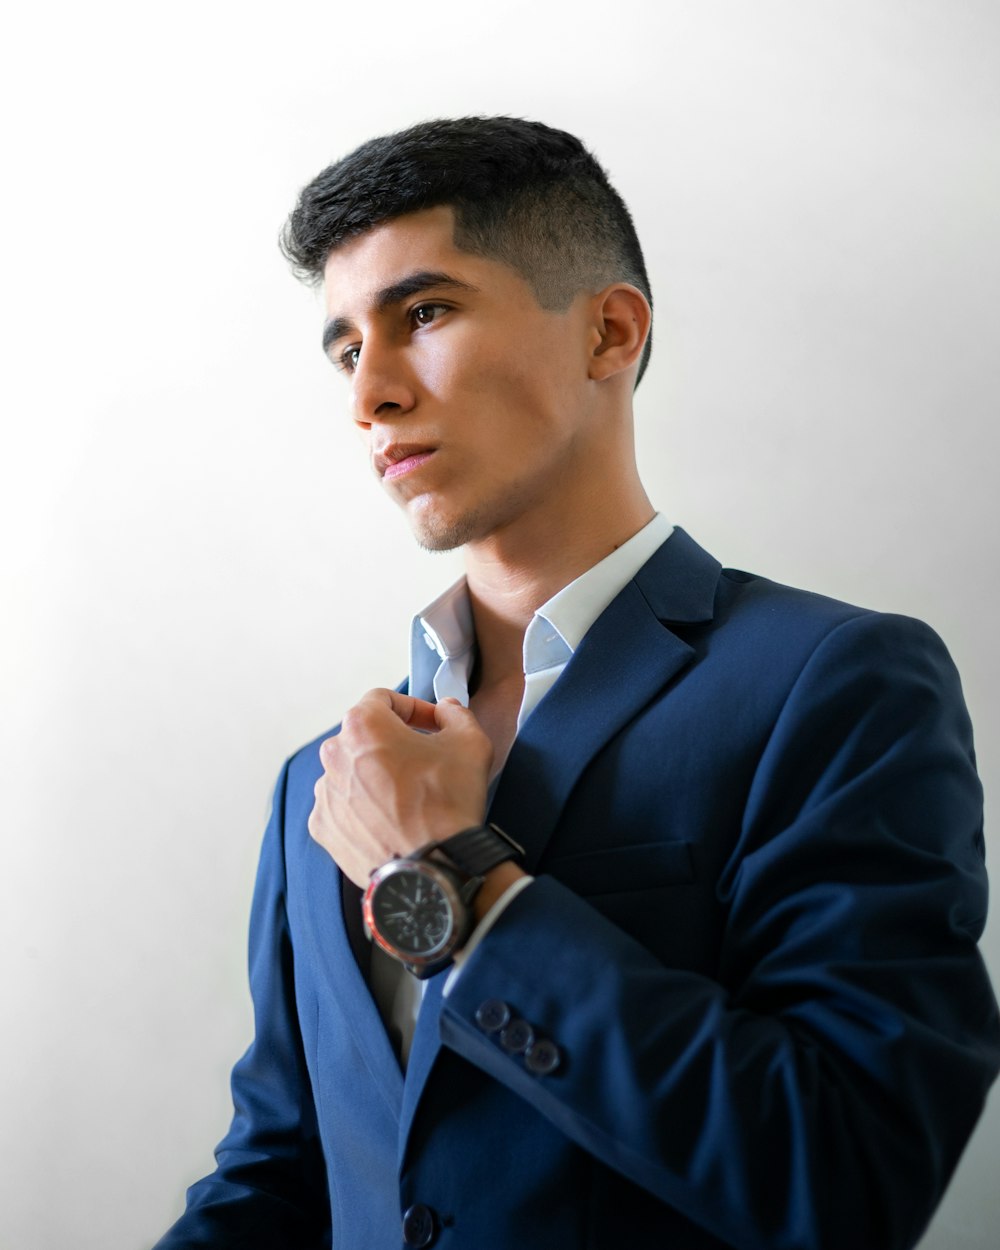 a man wearing a suit and holding a watch